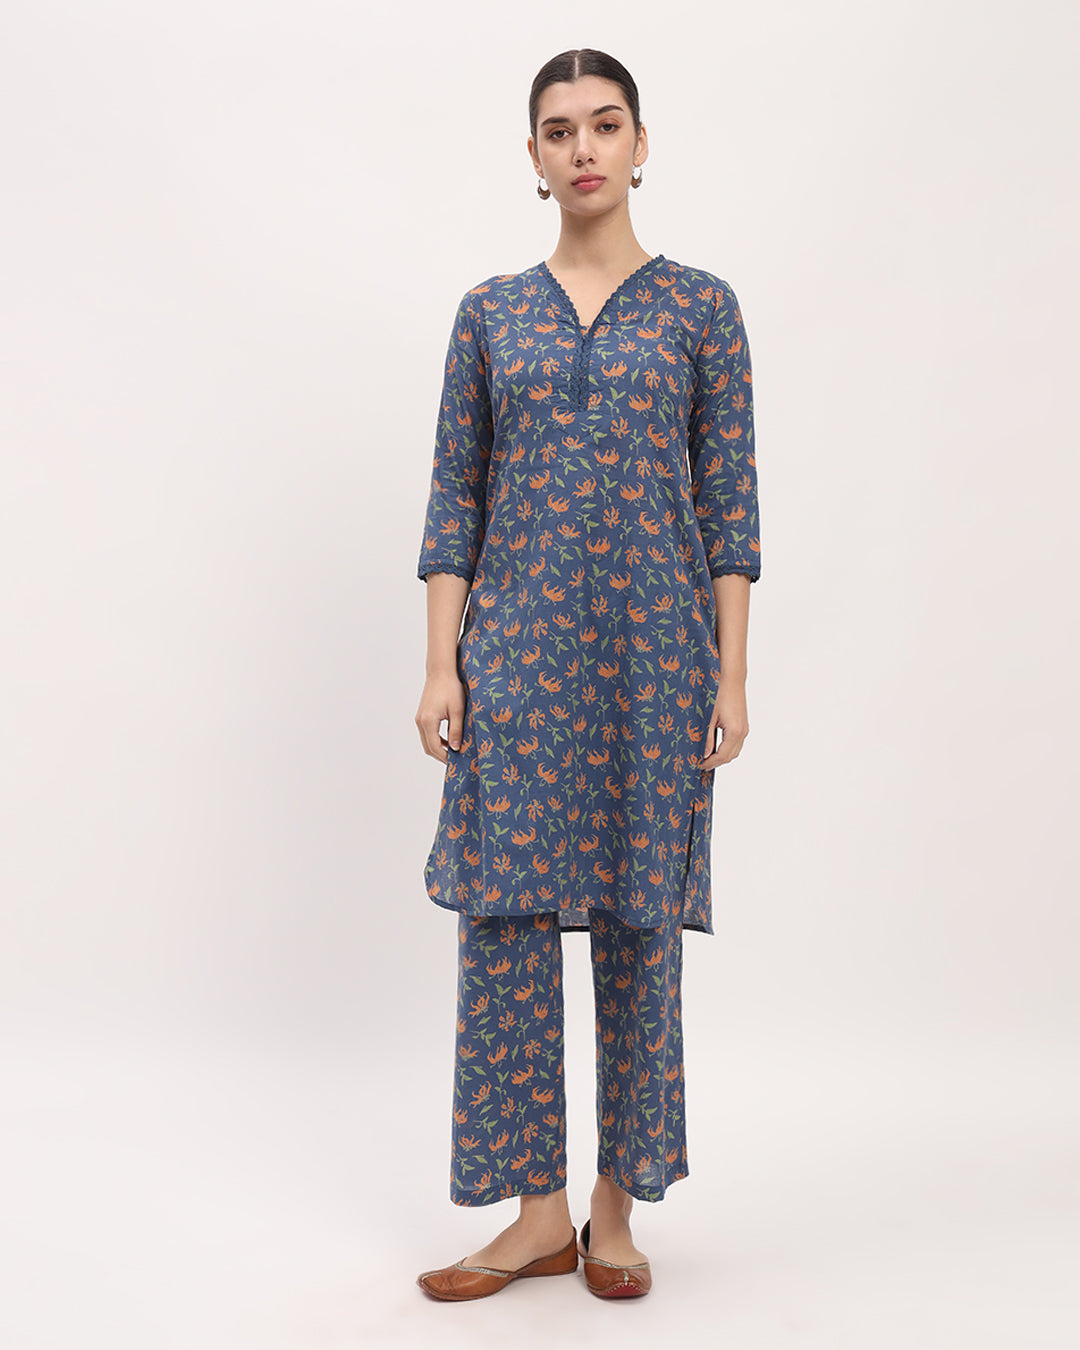 Combo: Fire Lillies & Flora Fables Lace Affair Printed Kurta (Without Bottoms)